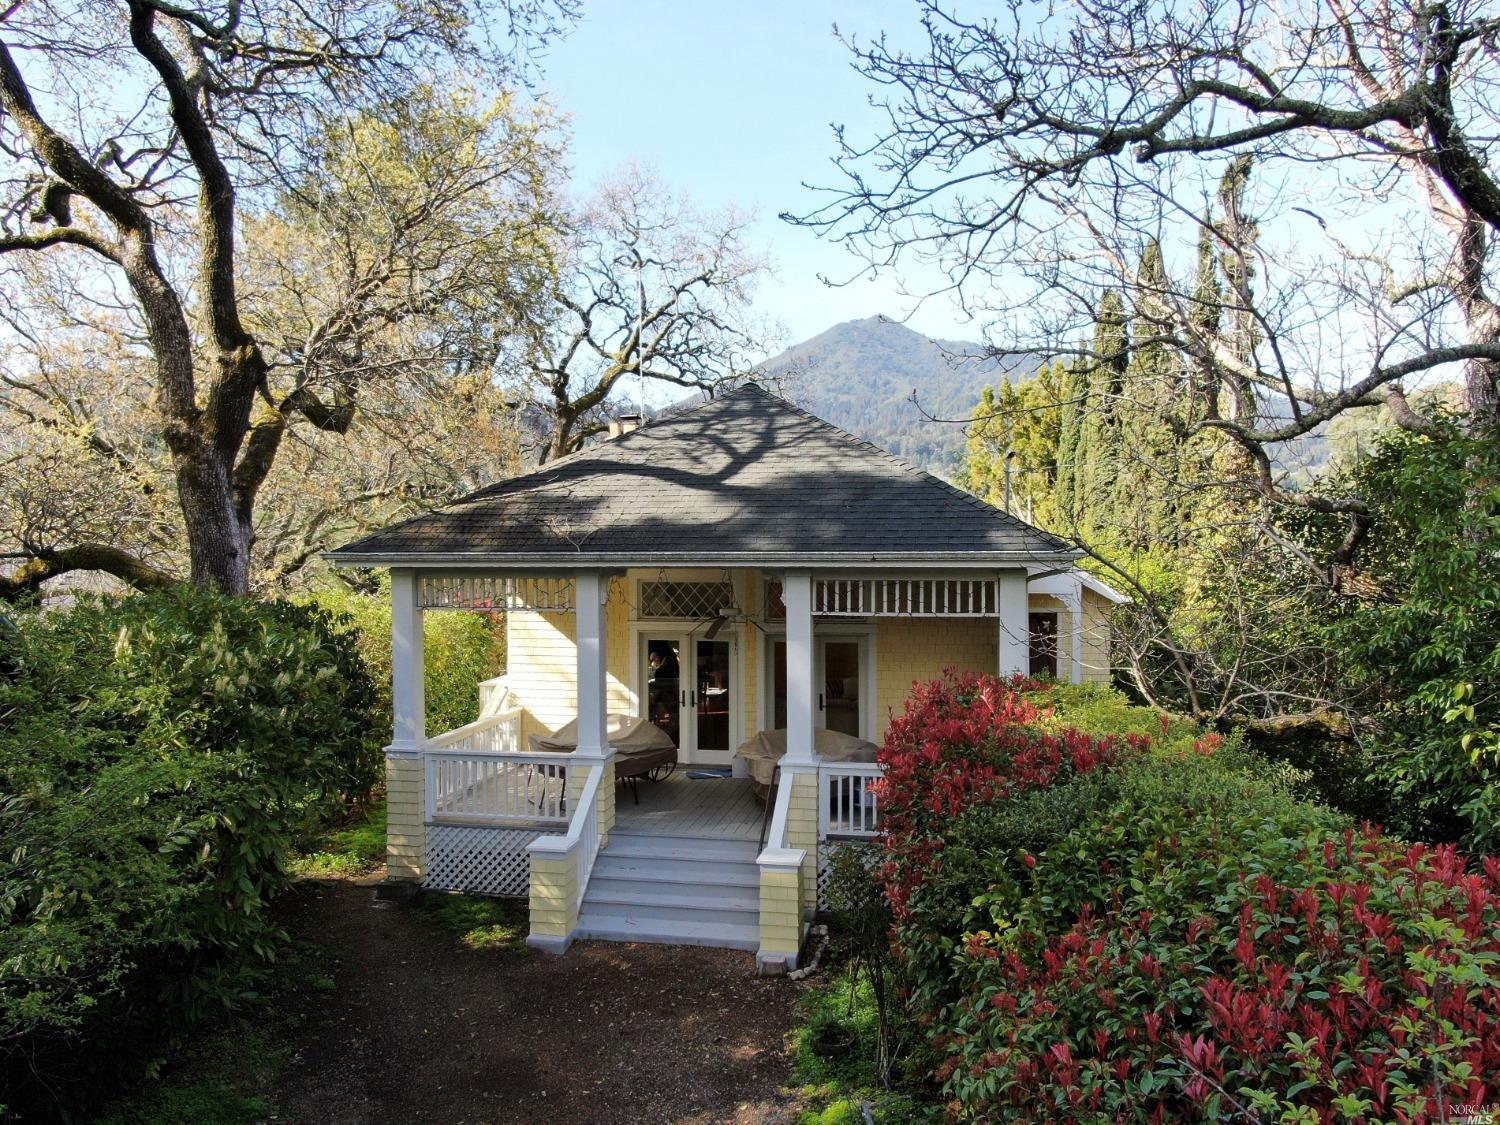 Vintage Charmer in the prime heart of Kentfield Gardens. Set back from the street with the driveway entrance on Rosebank Avenue, this magical home is ideally sited on a flat, gated, street-to-street two parcel lot with stunning views of Mt. Tamalpais. Expanded over the years with vaulted LR ceilings and  skylights that fill the room with natural light. The living room opens through double French doors to a mature yard and garden blooming with roses and azaleas. Kitchen with gas cook top and ample cabinetry, counter space and breakfast bar. Two bedrooms both with views over the west facing porch to Mt.Tamalpais beyond. Two full bathrooms plus a full height basement, workshop and storage. Ample off-street parking. Kentfield School district with an easy location where kids can get to both Bacich Elementary and Kent Middle School.  In a neighborhood of higher priced homes, this is a special opportunity you won't want to miss.